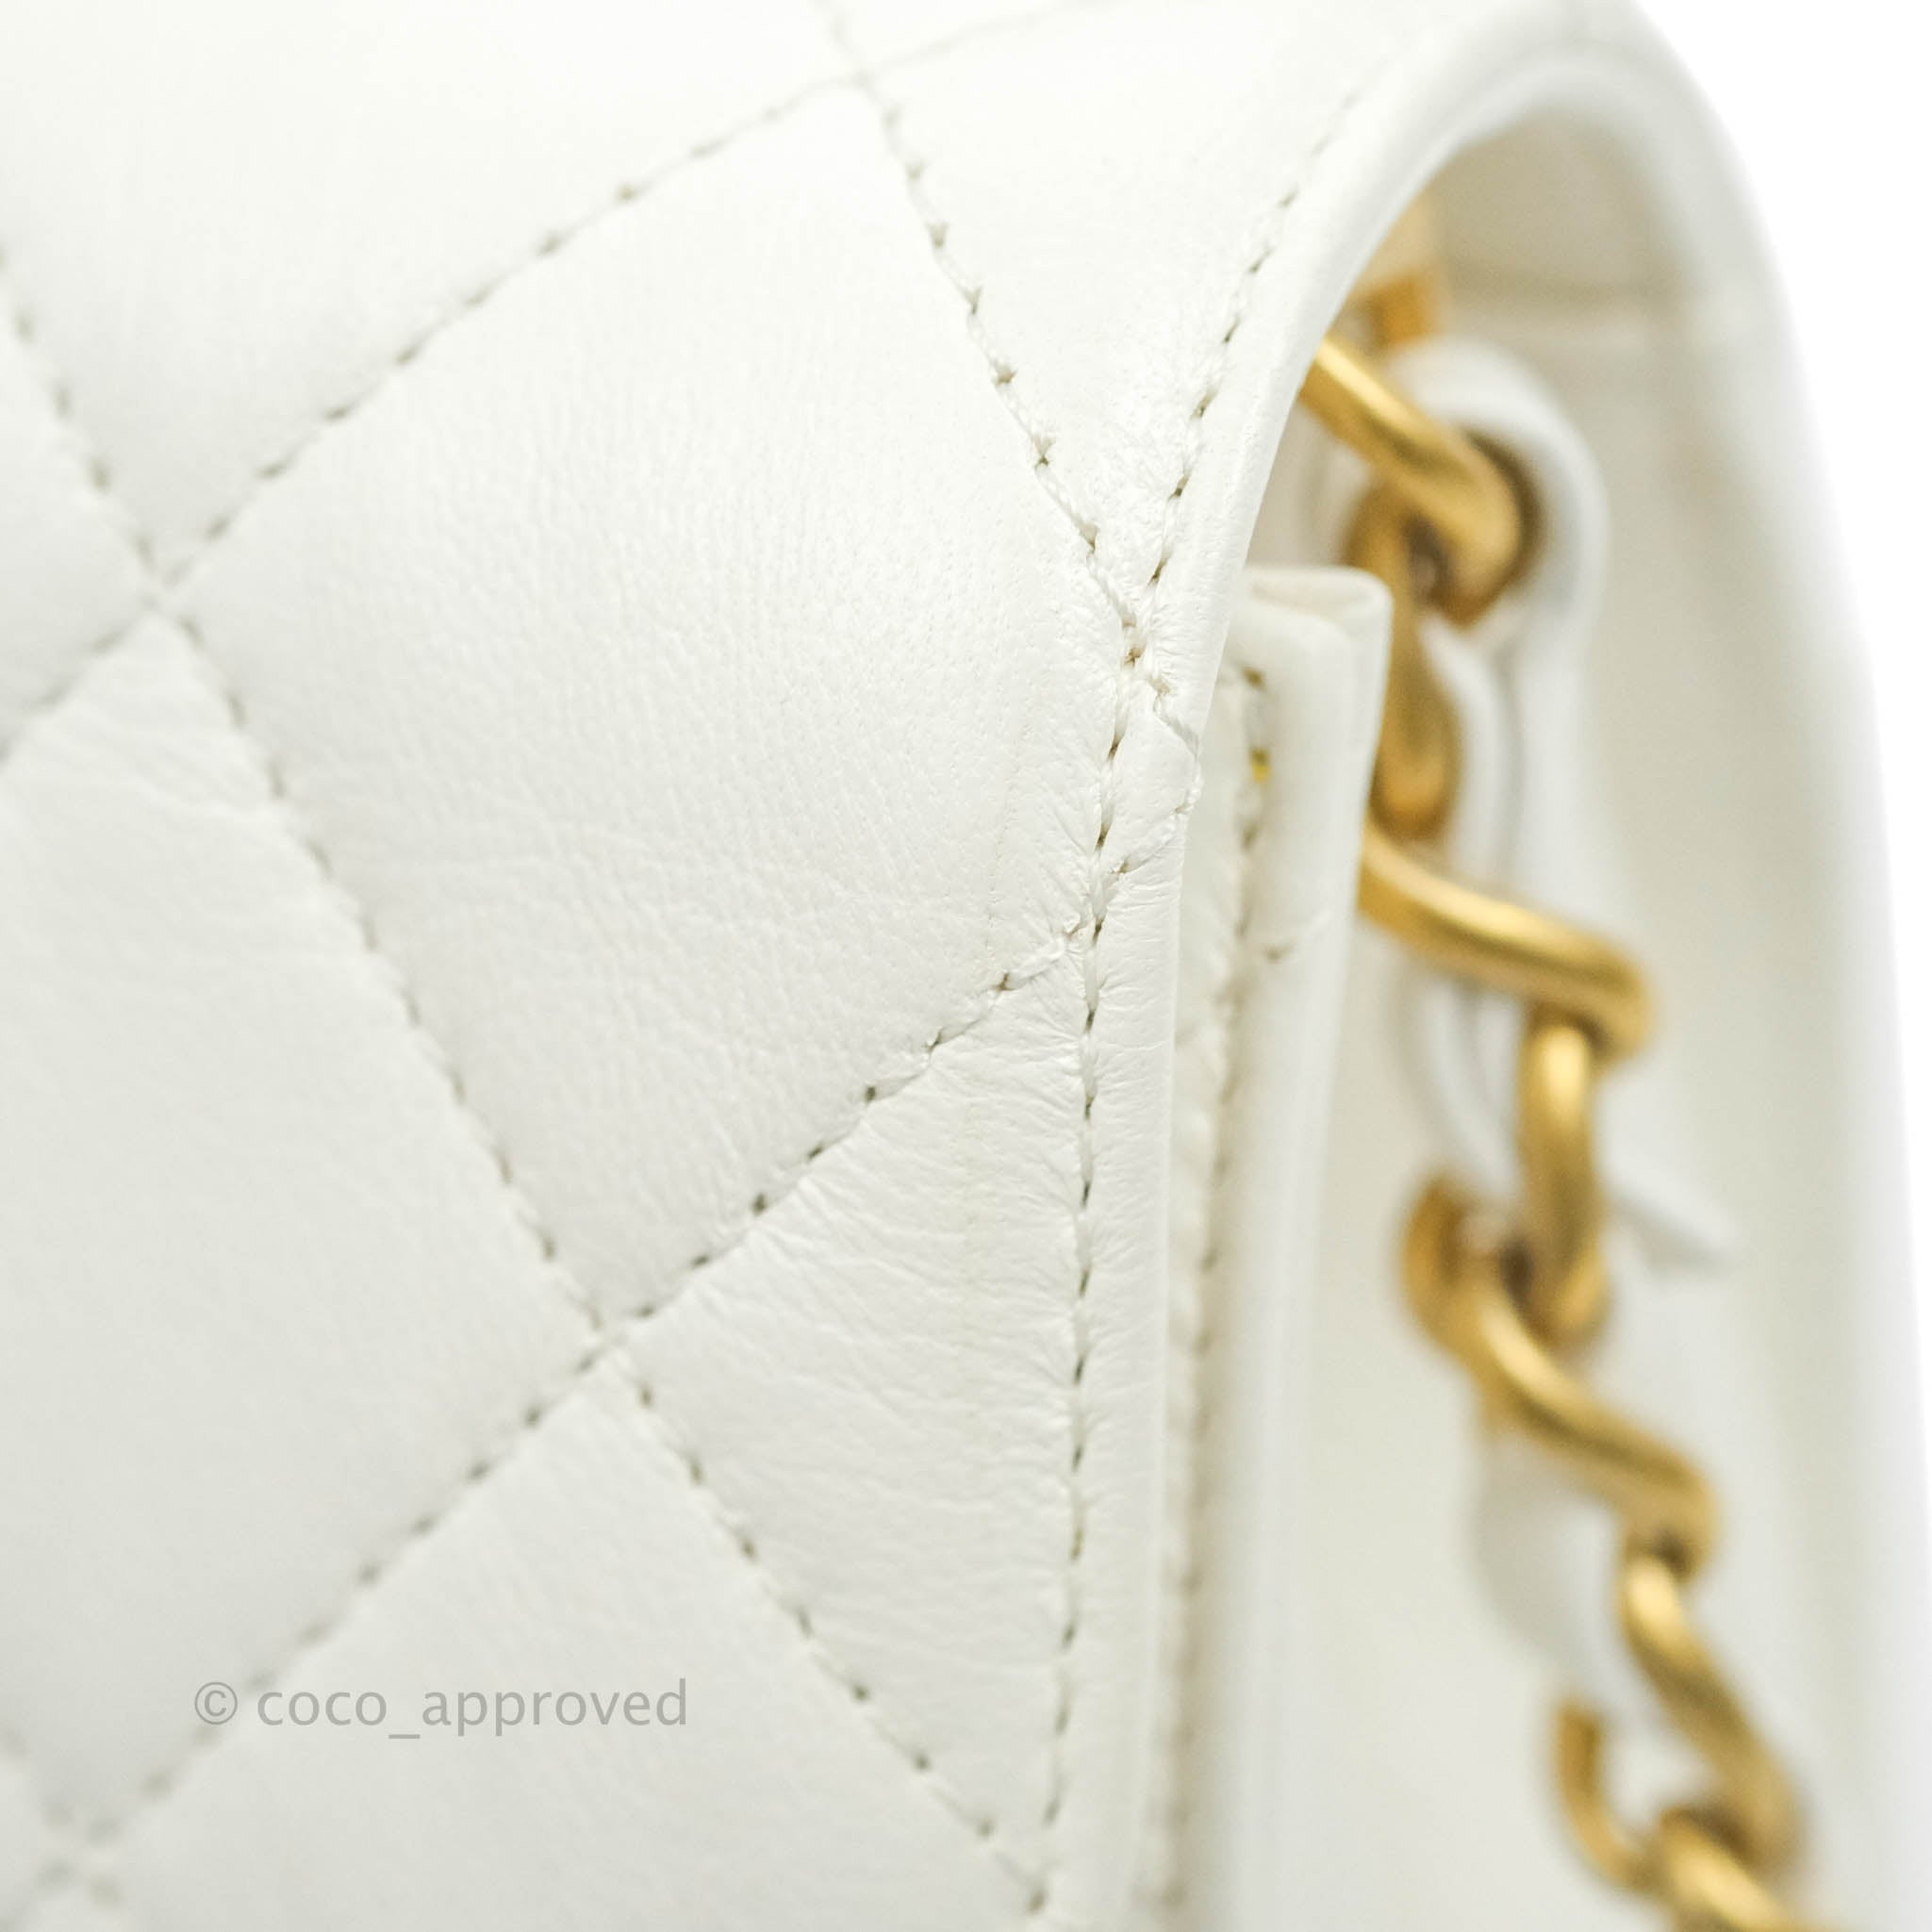 Chanel Quilted CC Top Handle Flap White Calfskin Aged Gold Hardware – Coco  Approved Studio